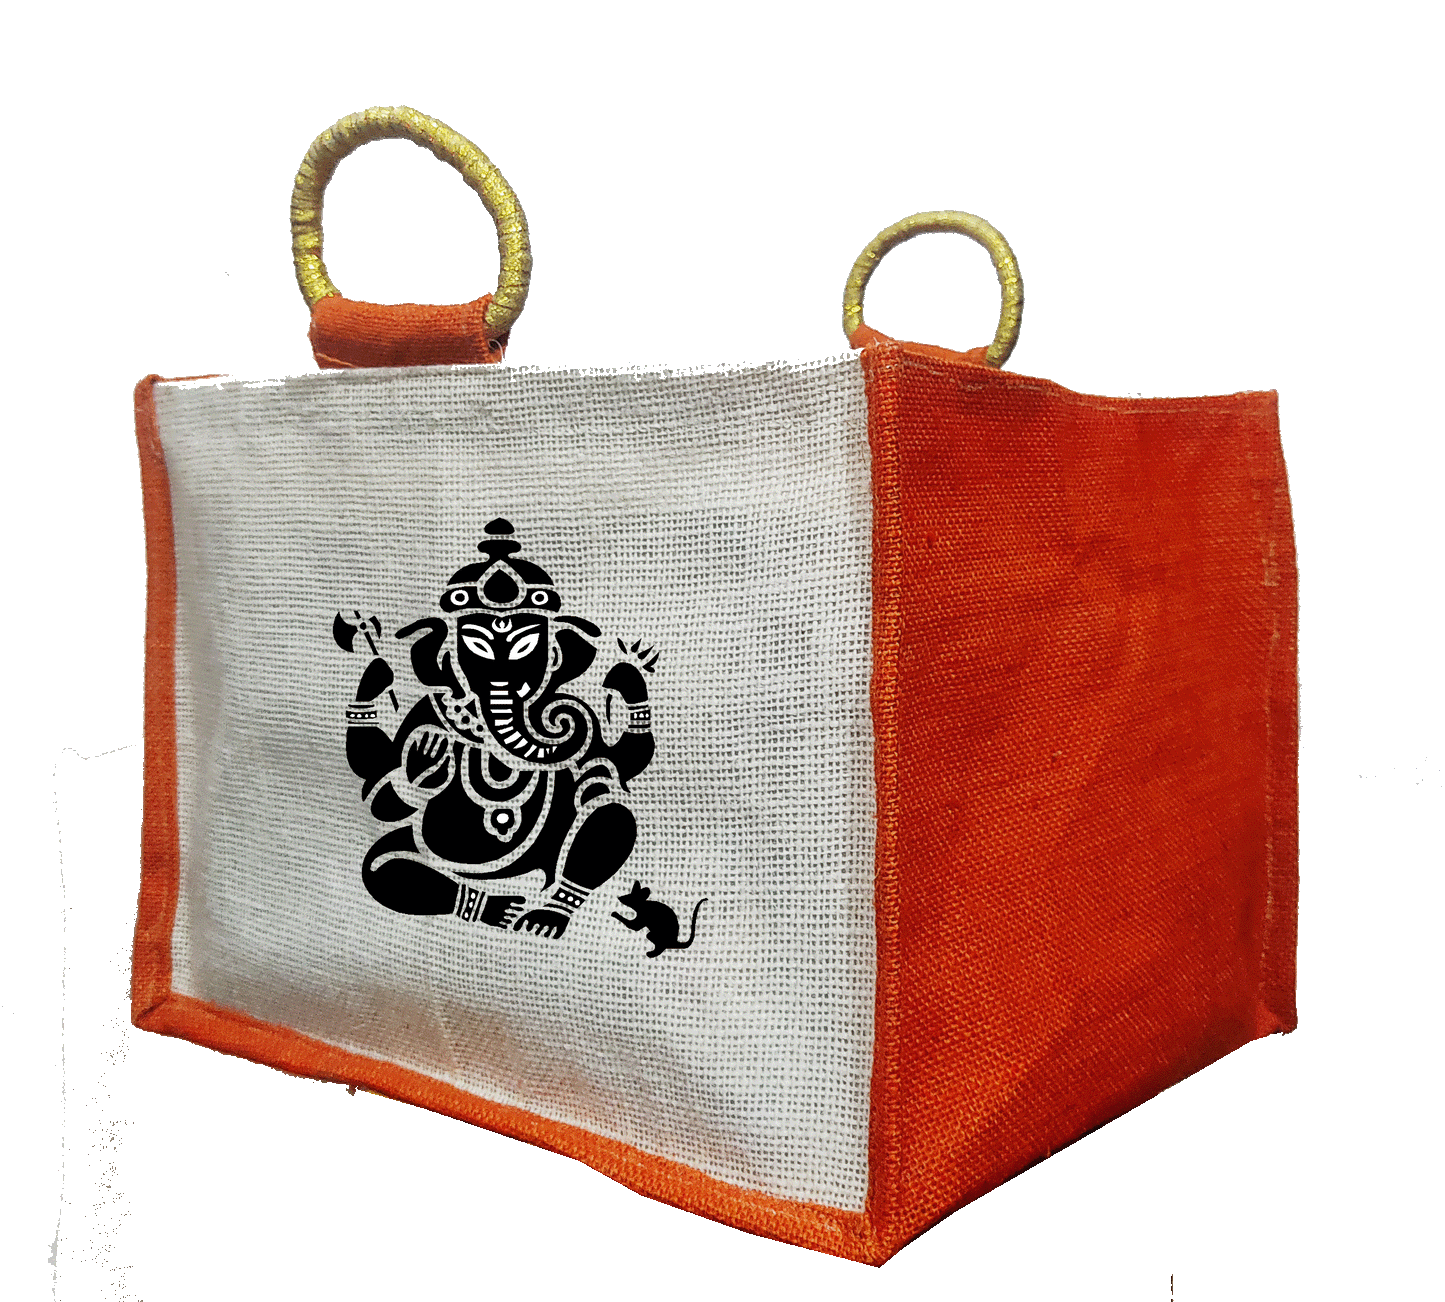 Natural  Jute Bags with Orange Colors for Sweet Box ,Wedding bags (Set of 2)